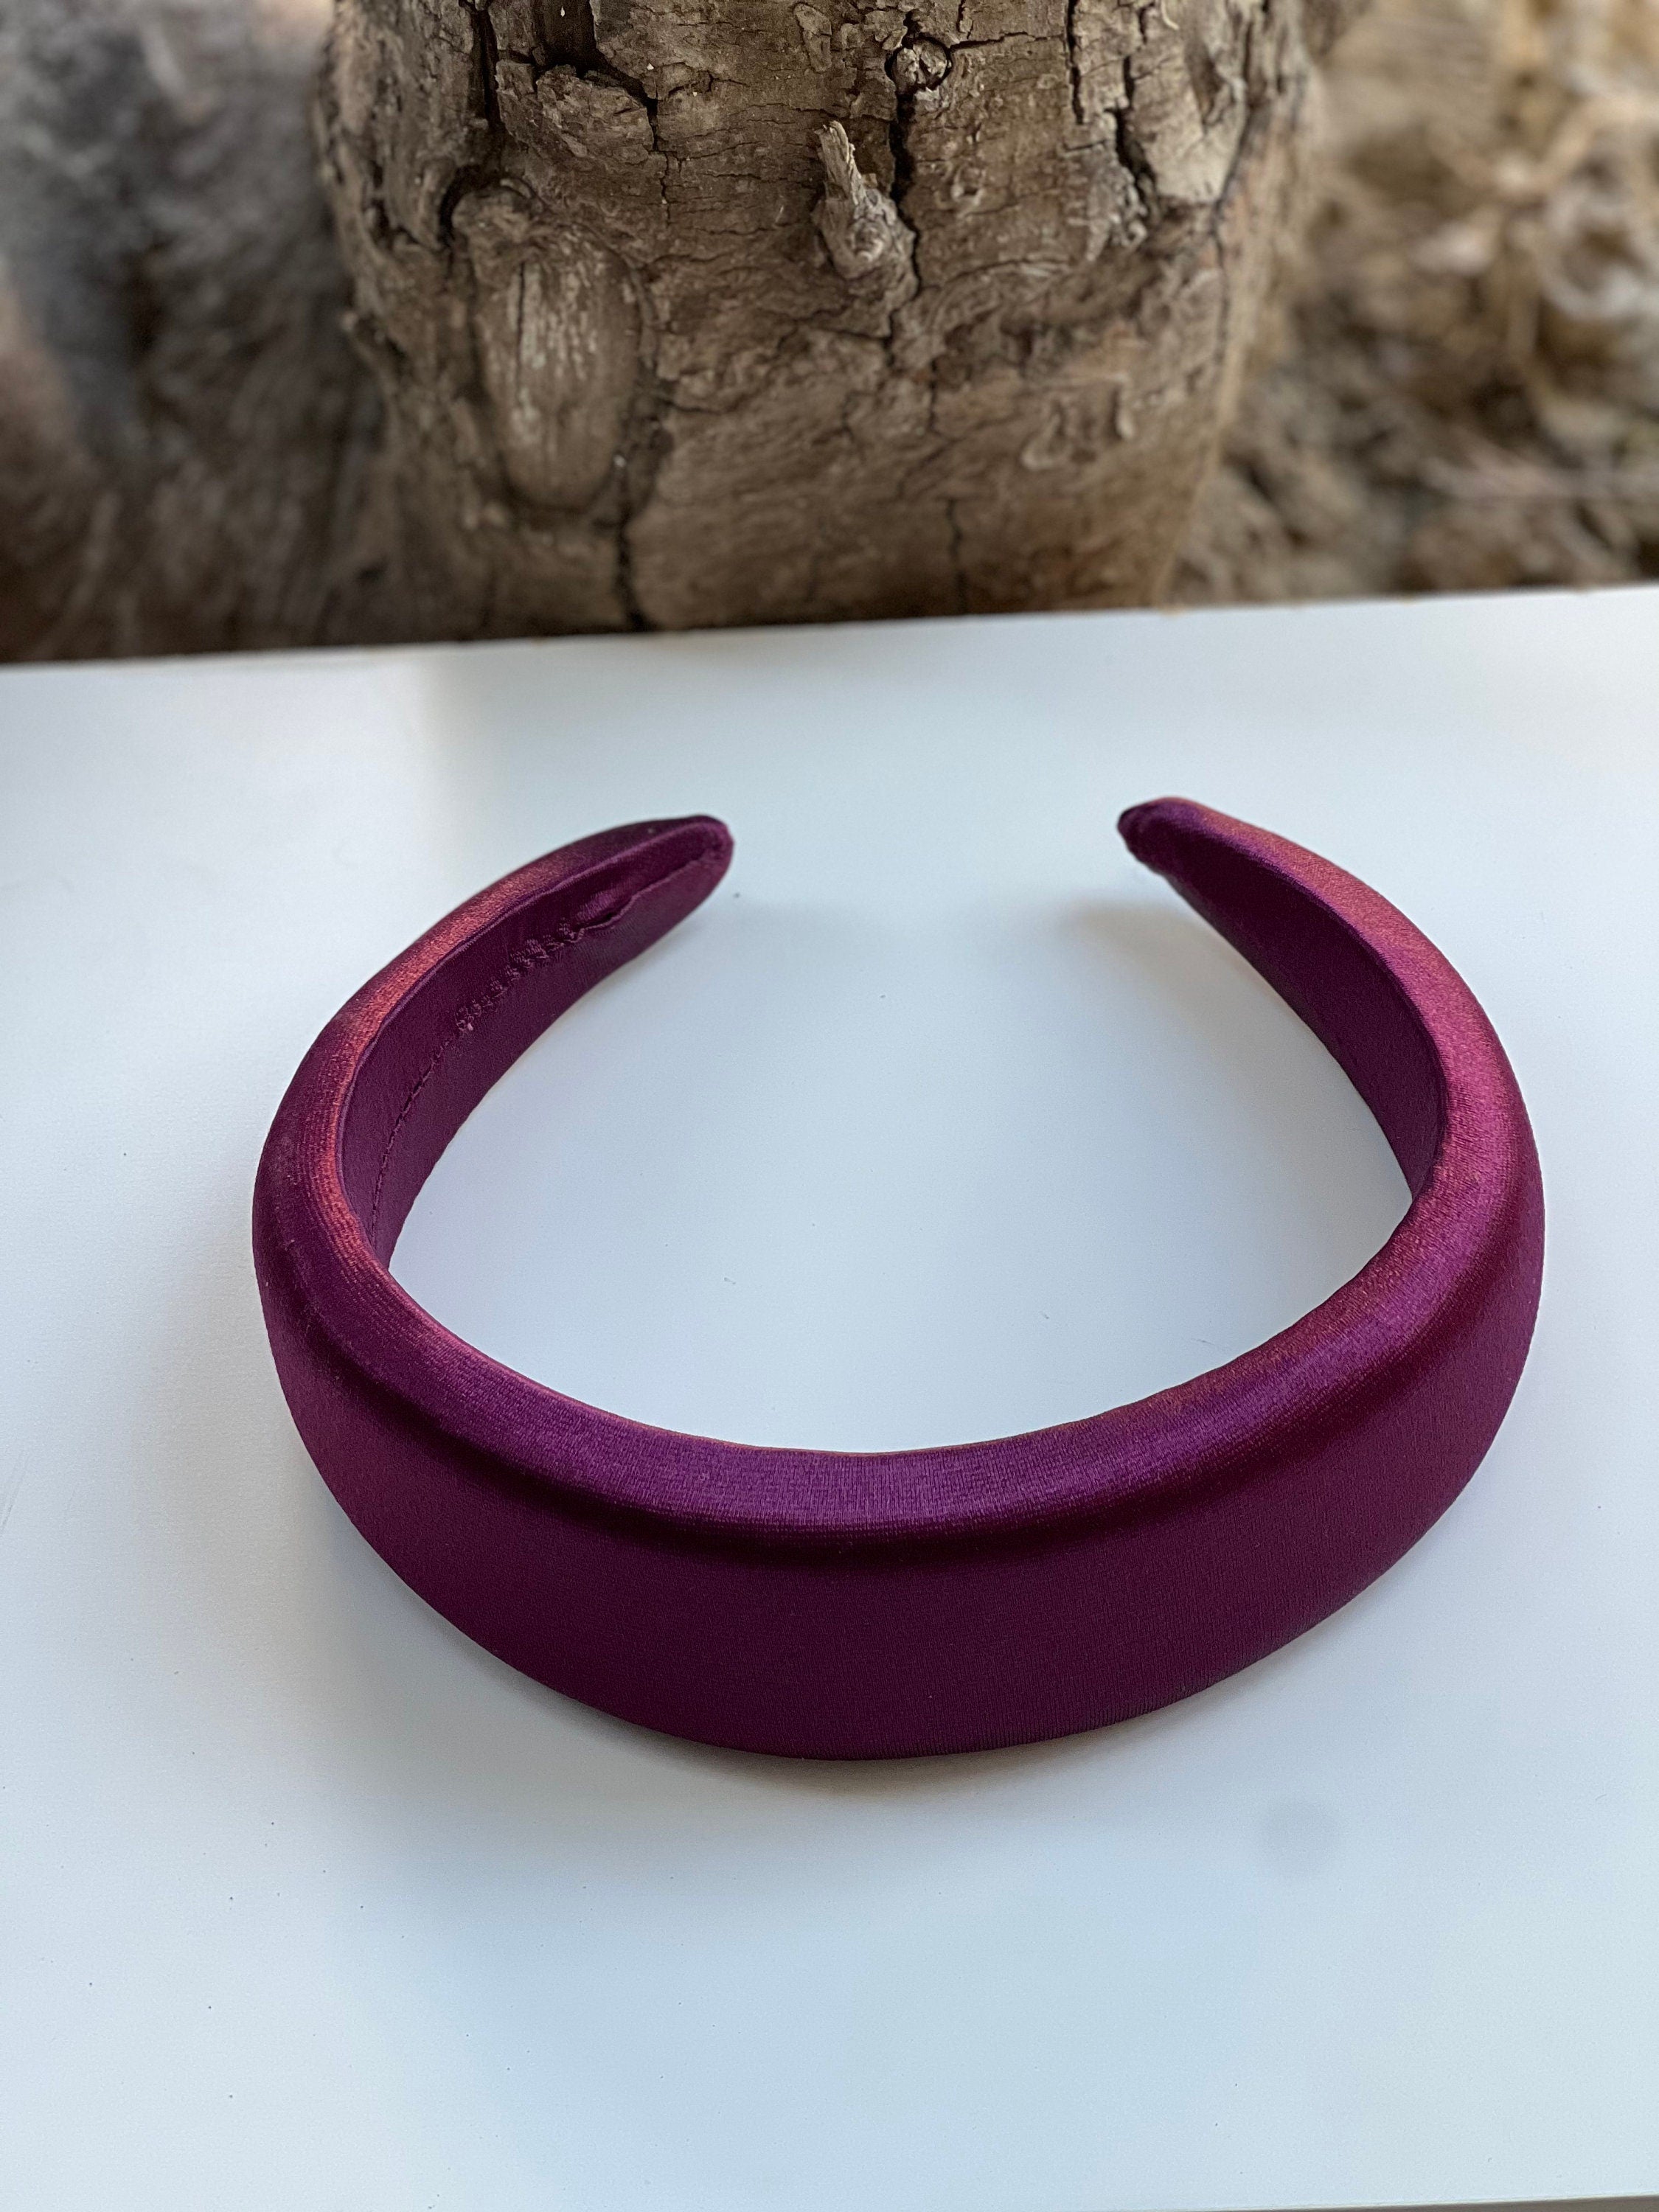 Elevate your hairstyle with this fashionable maroon headband for women.